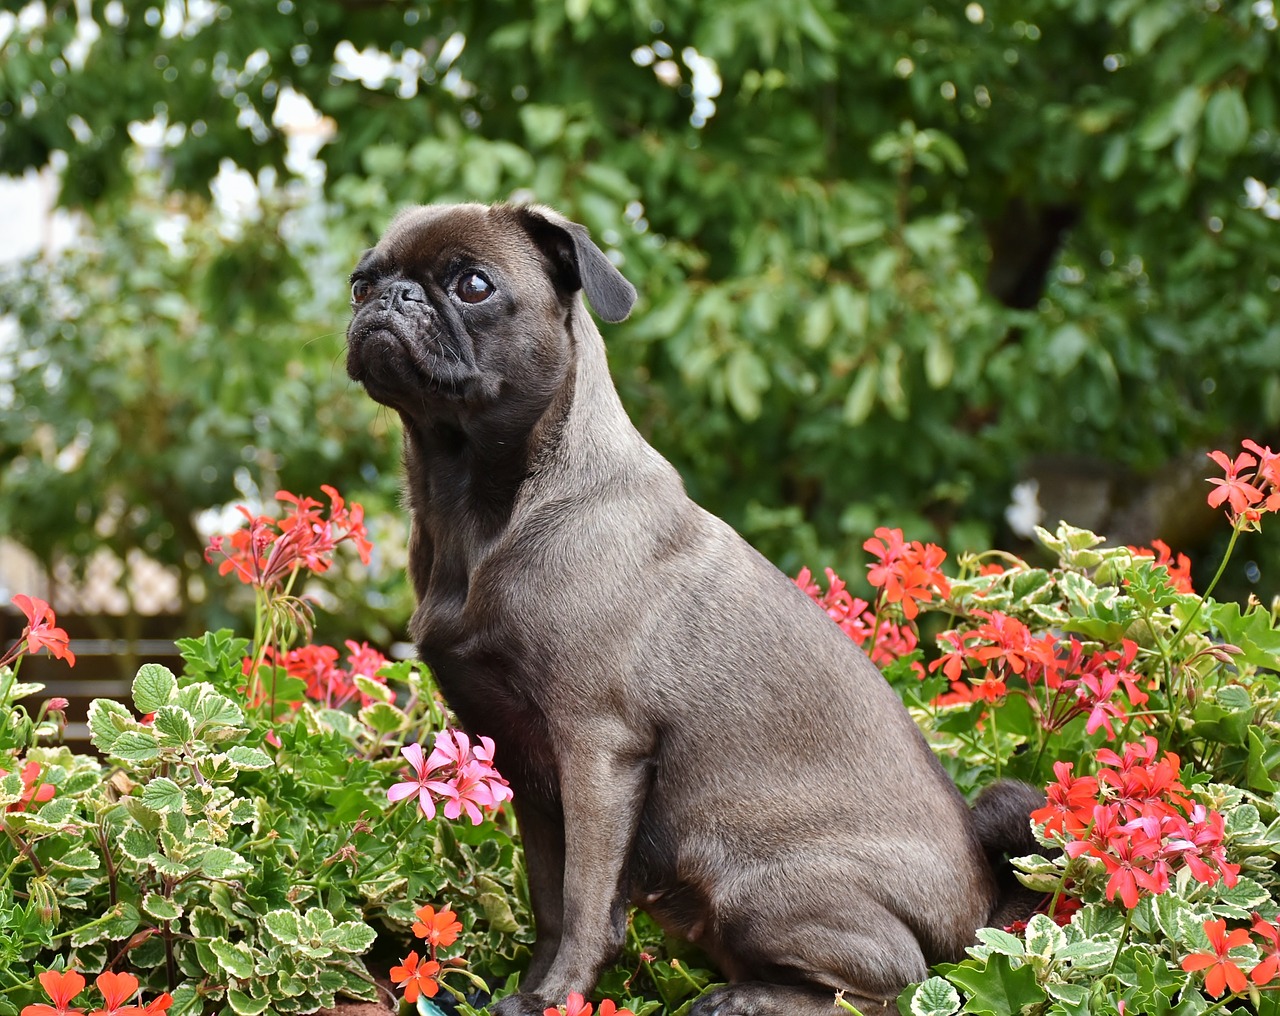 Black pug sits in a flower bed of red flowers.